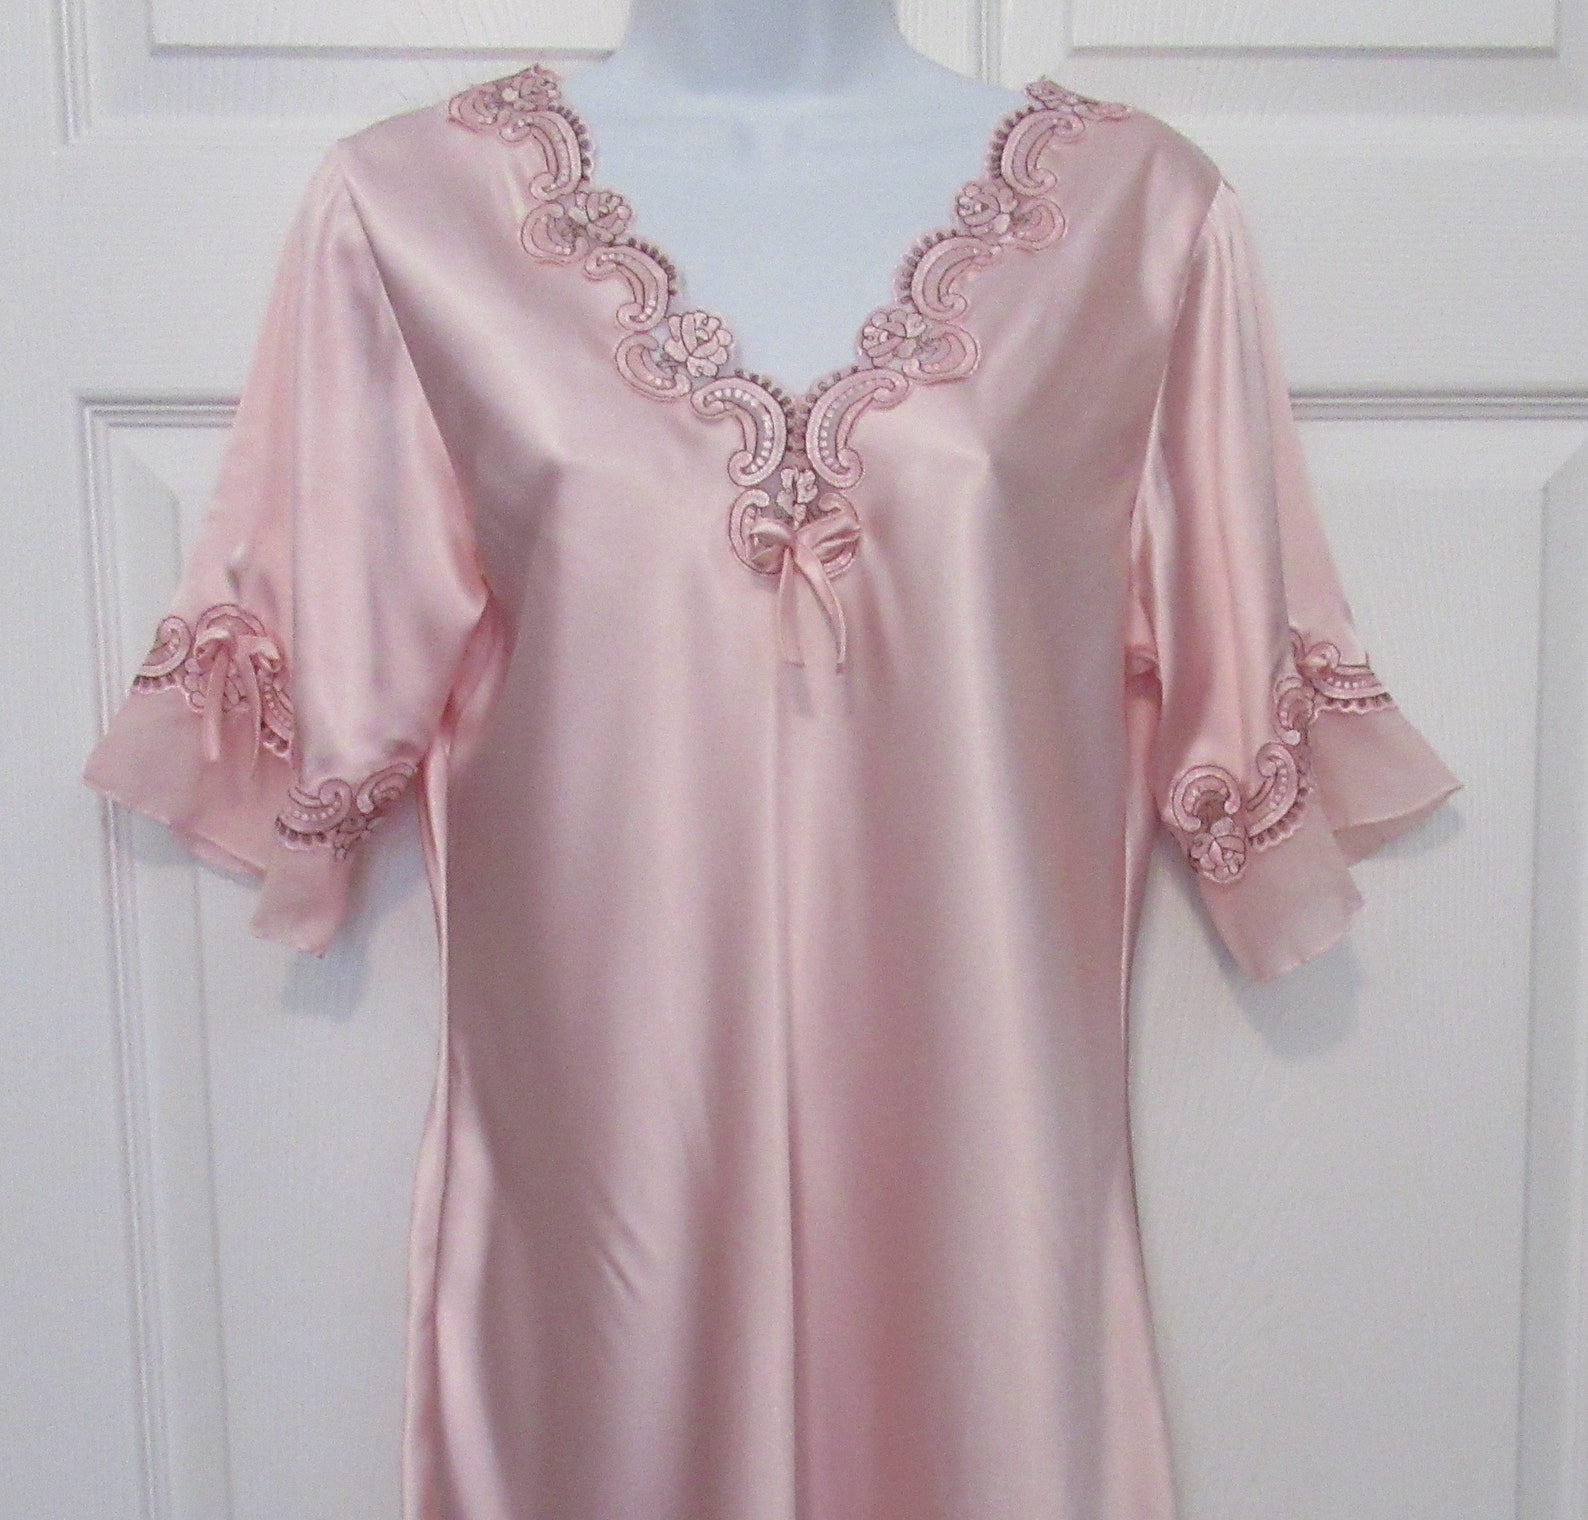 Bright pink short nightgown Never worn 38 bust Pink lace | Etsy